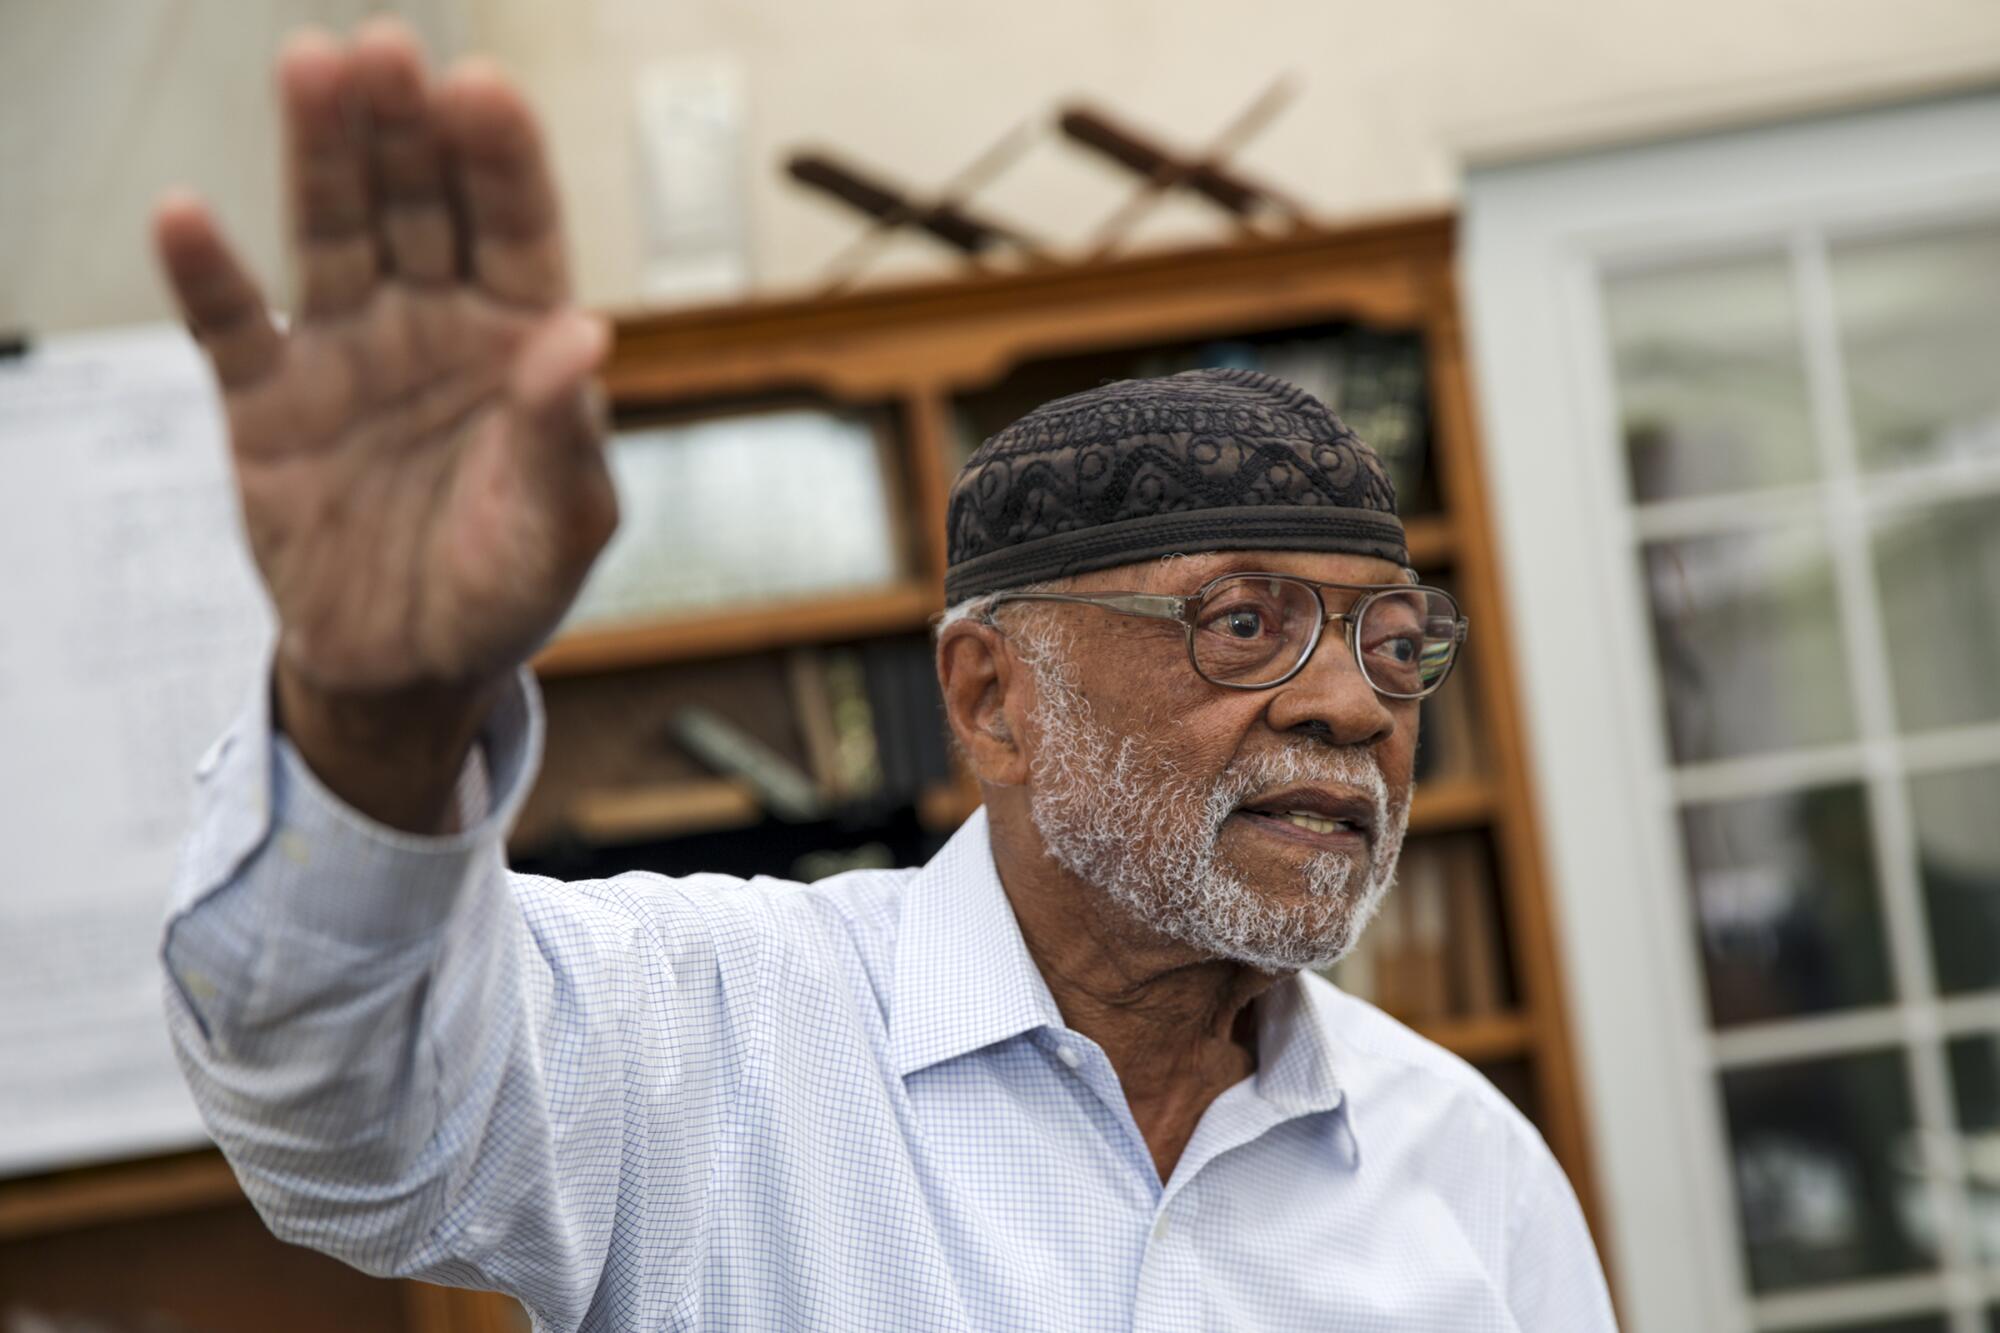 An older man wearing a cap and glasses with his hand raised